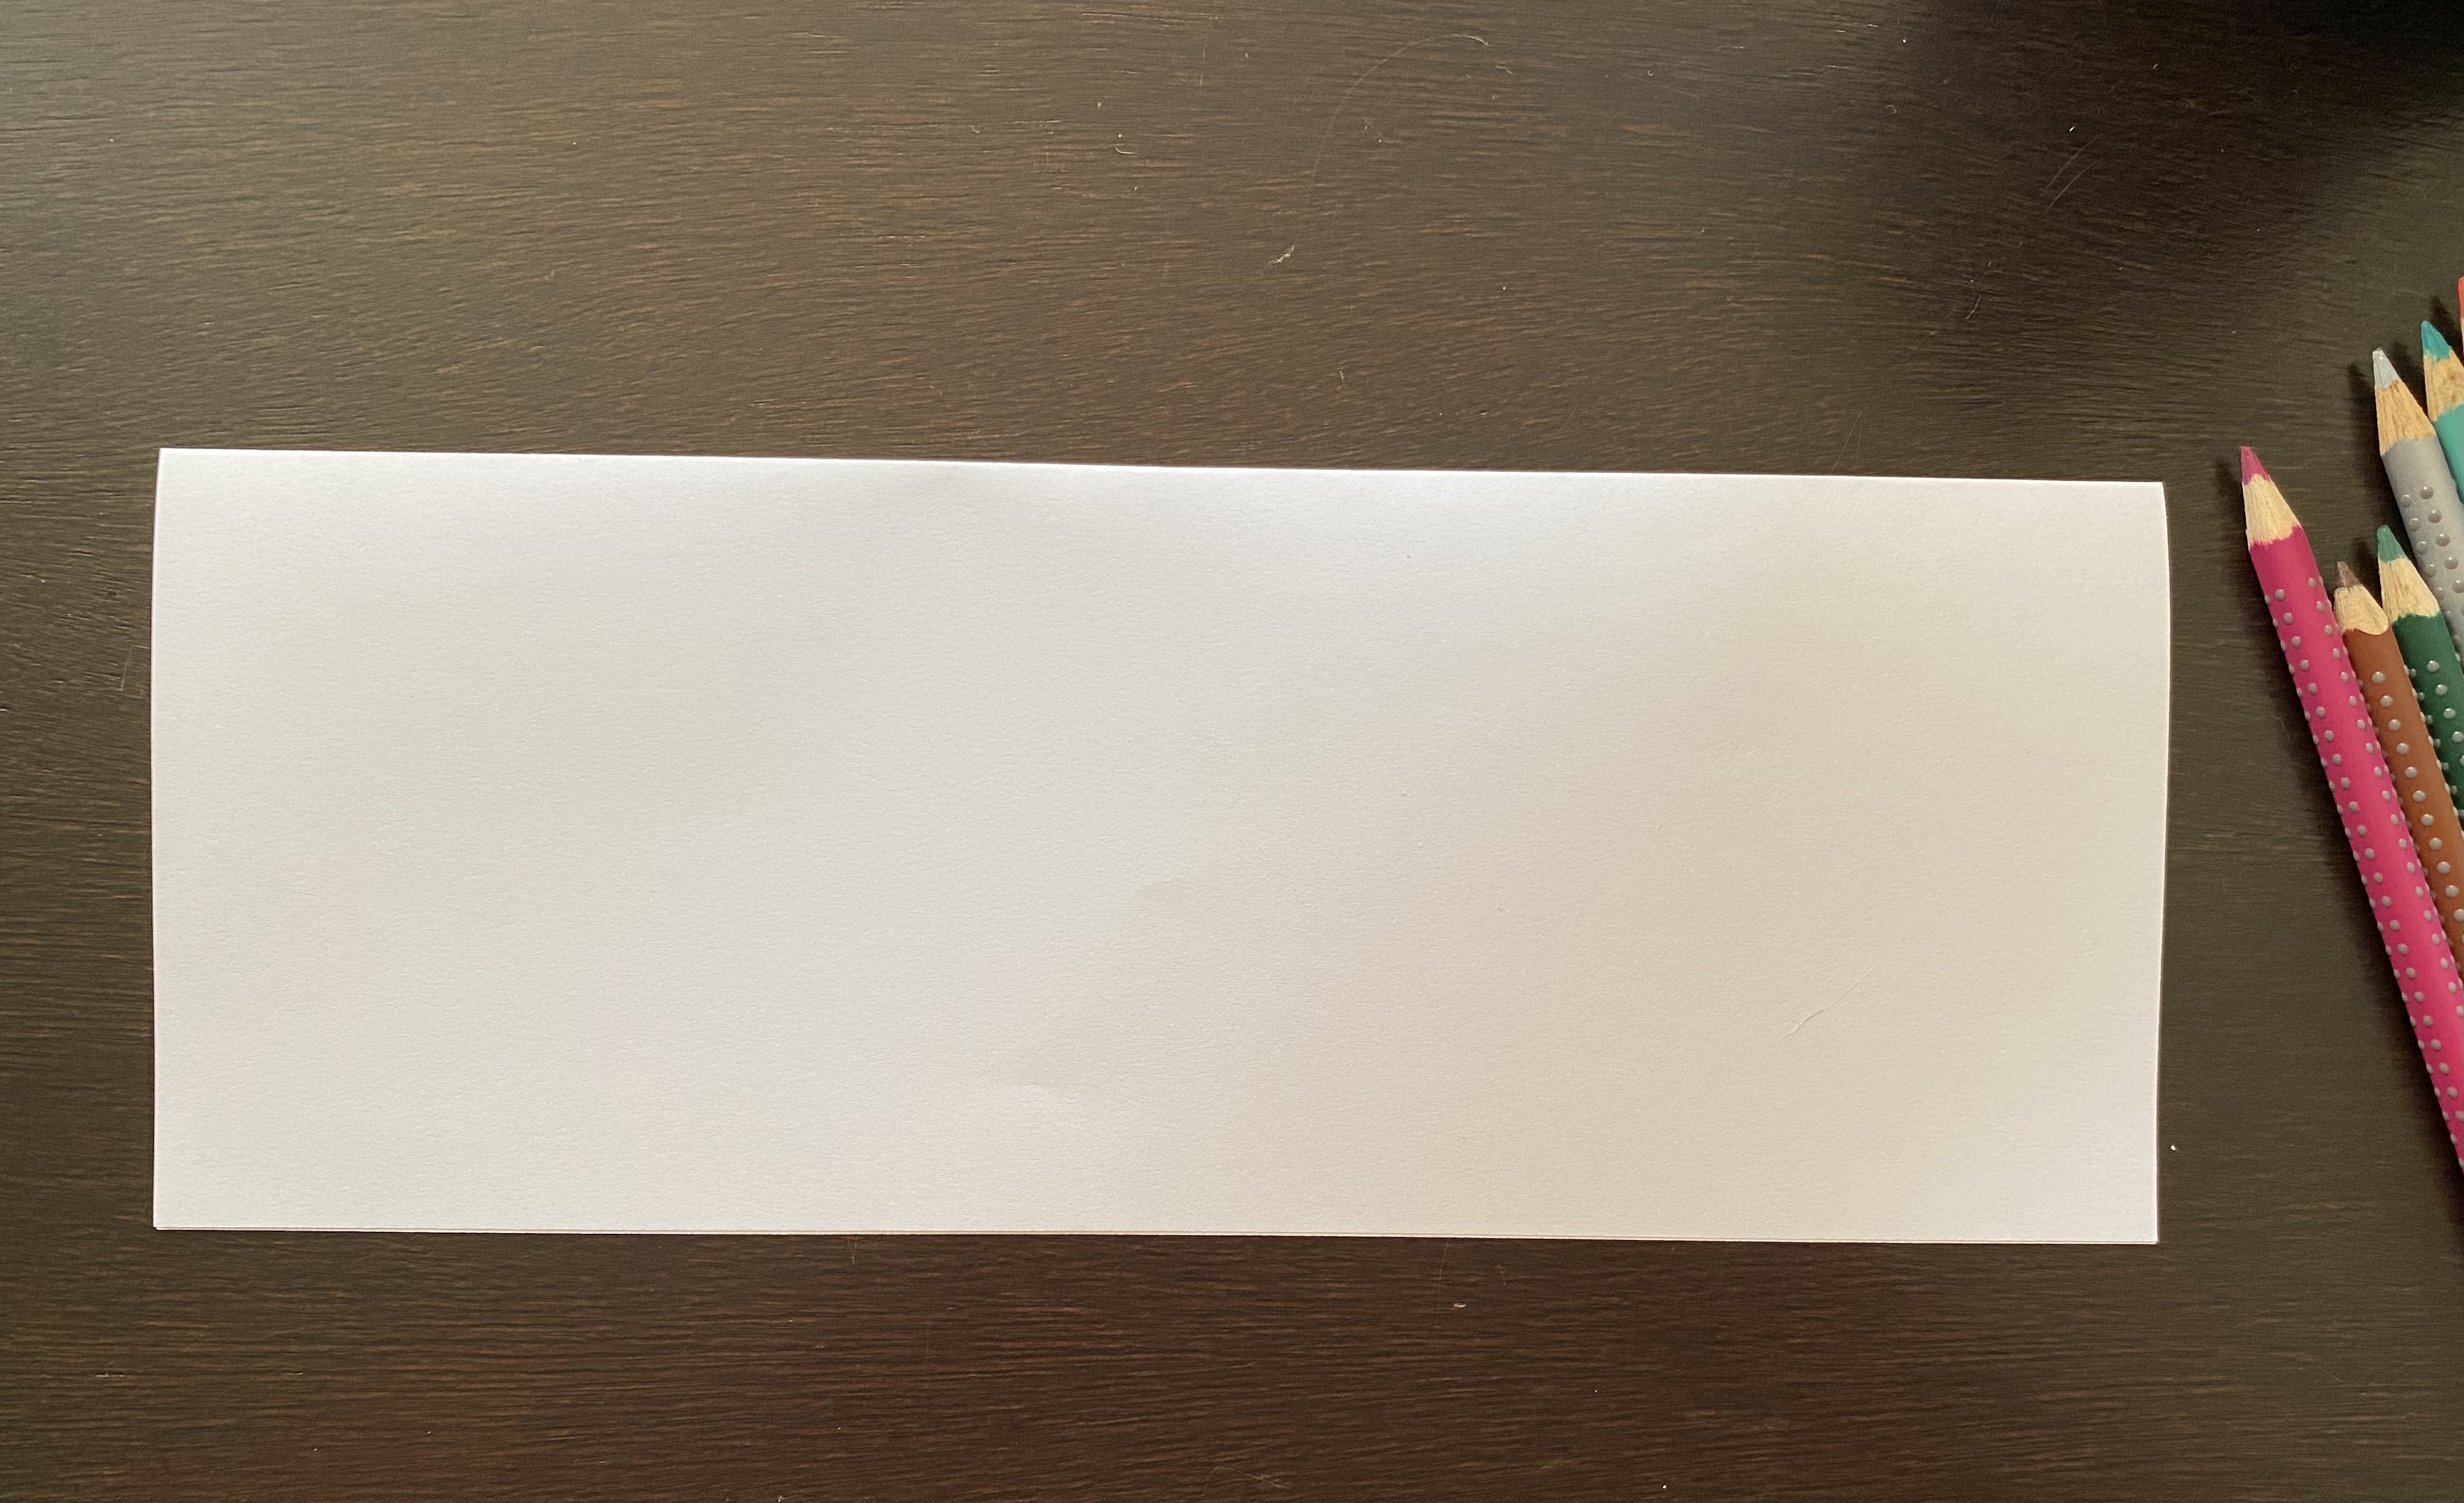 Long rectangle of white paper with colored pencils on the side